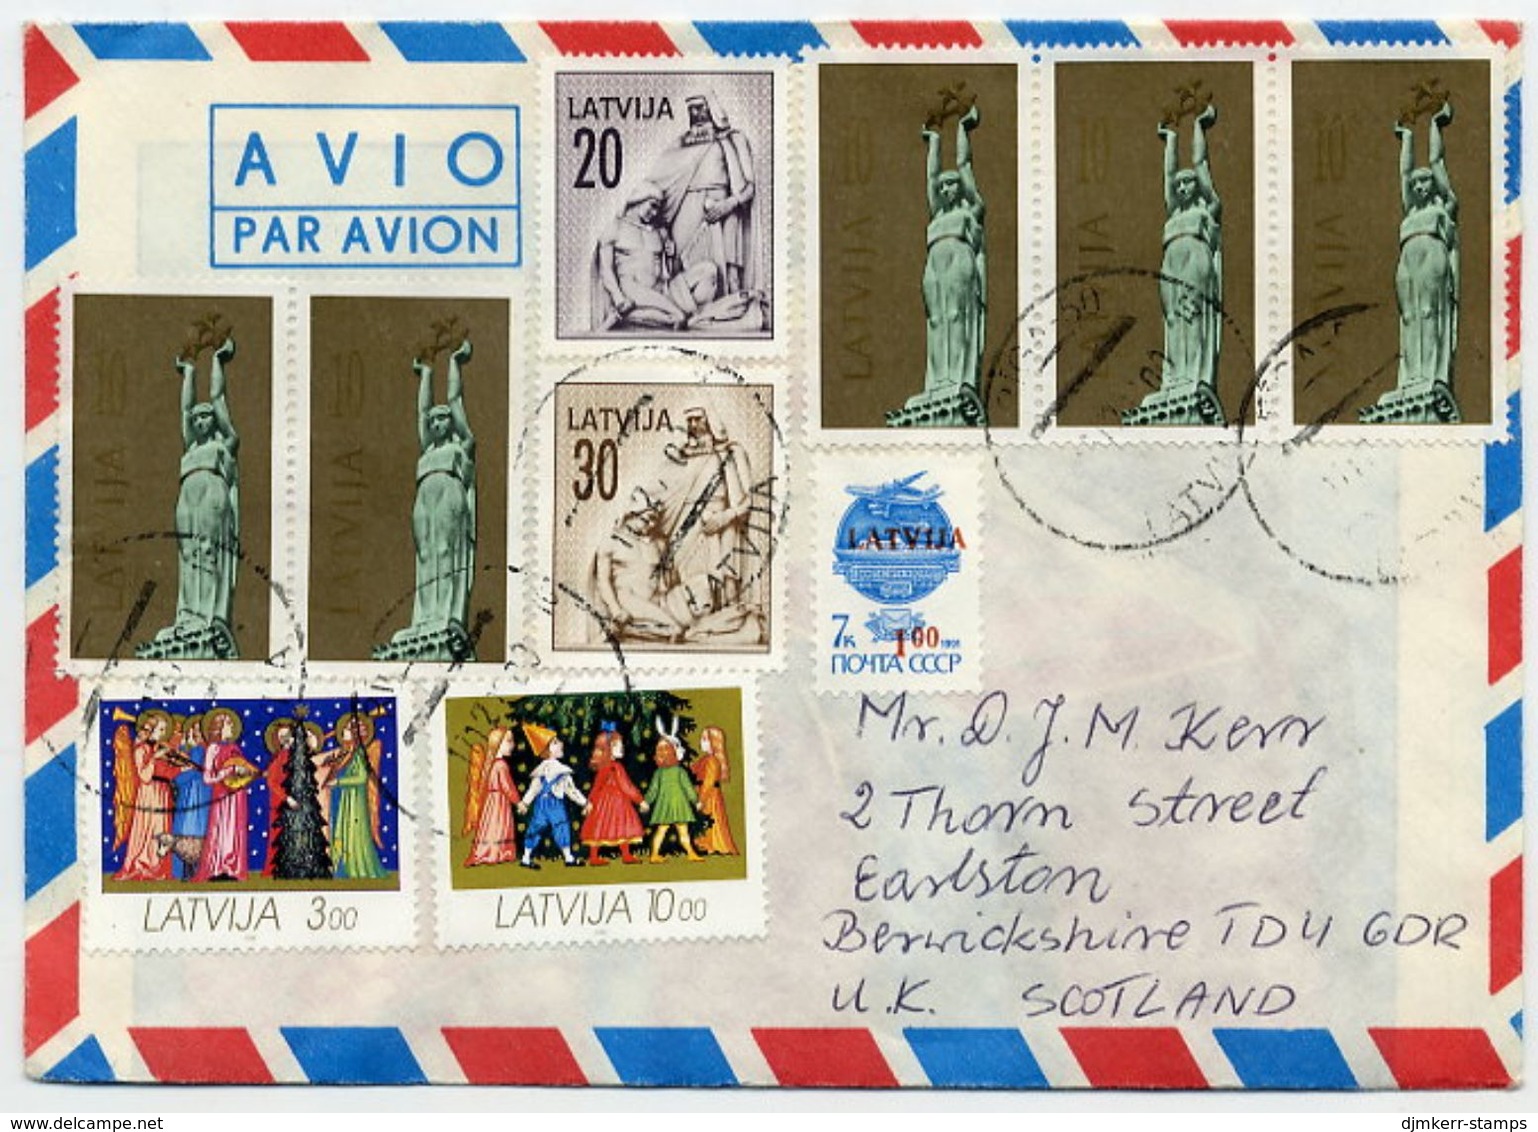 LATVIA 1992 Airmail Cover With Mixed Franking - Lettland